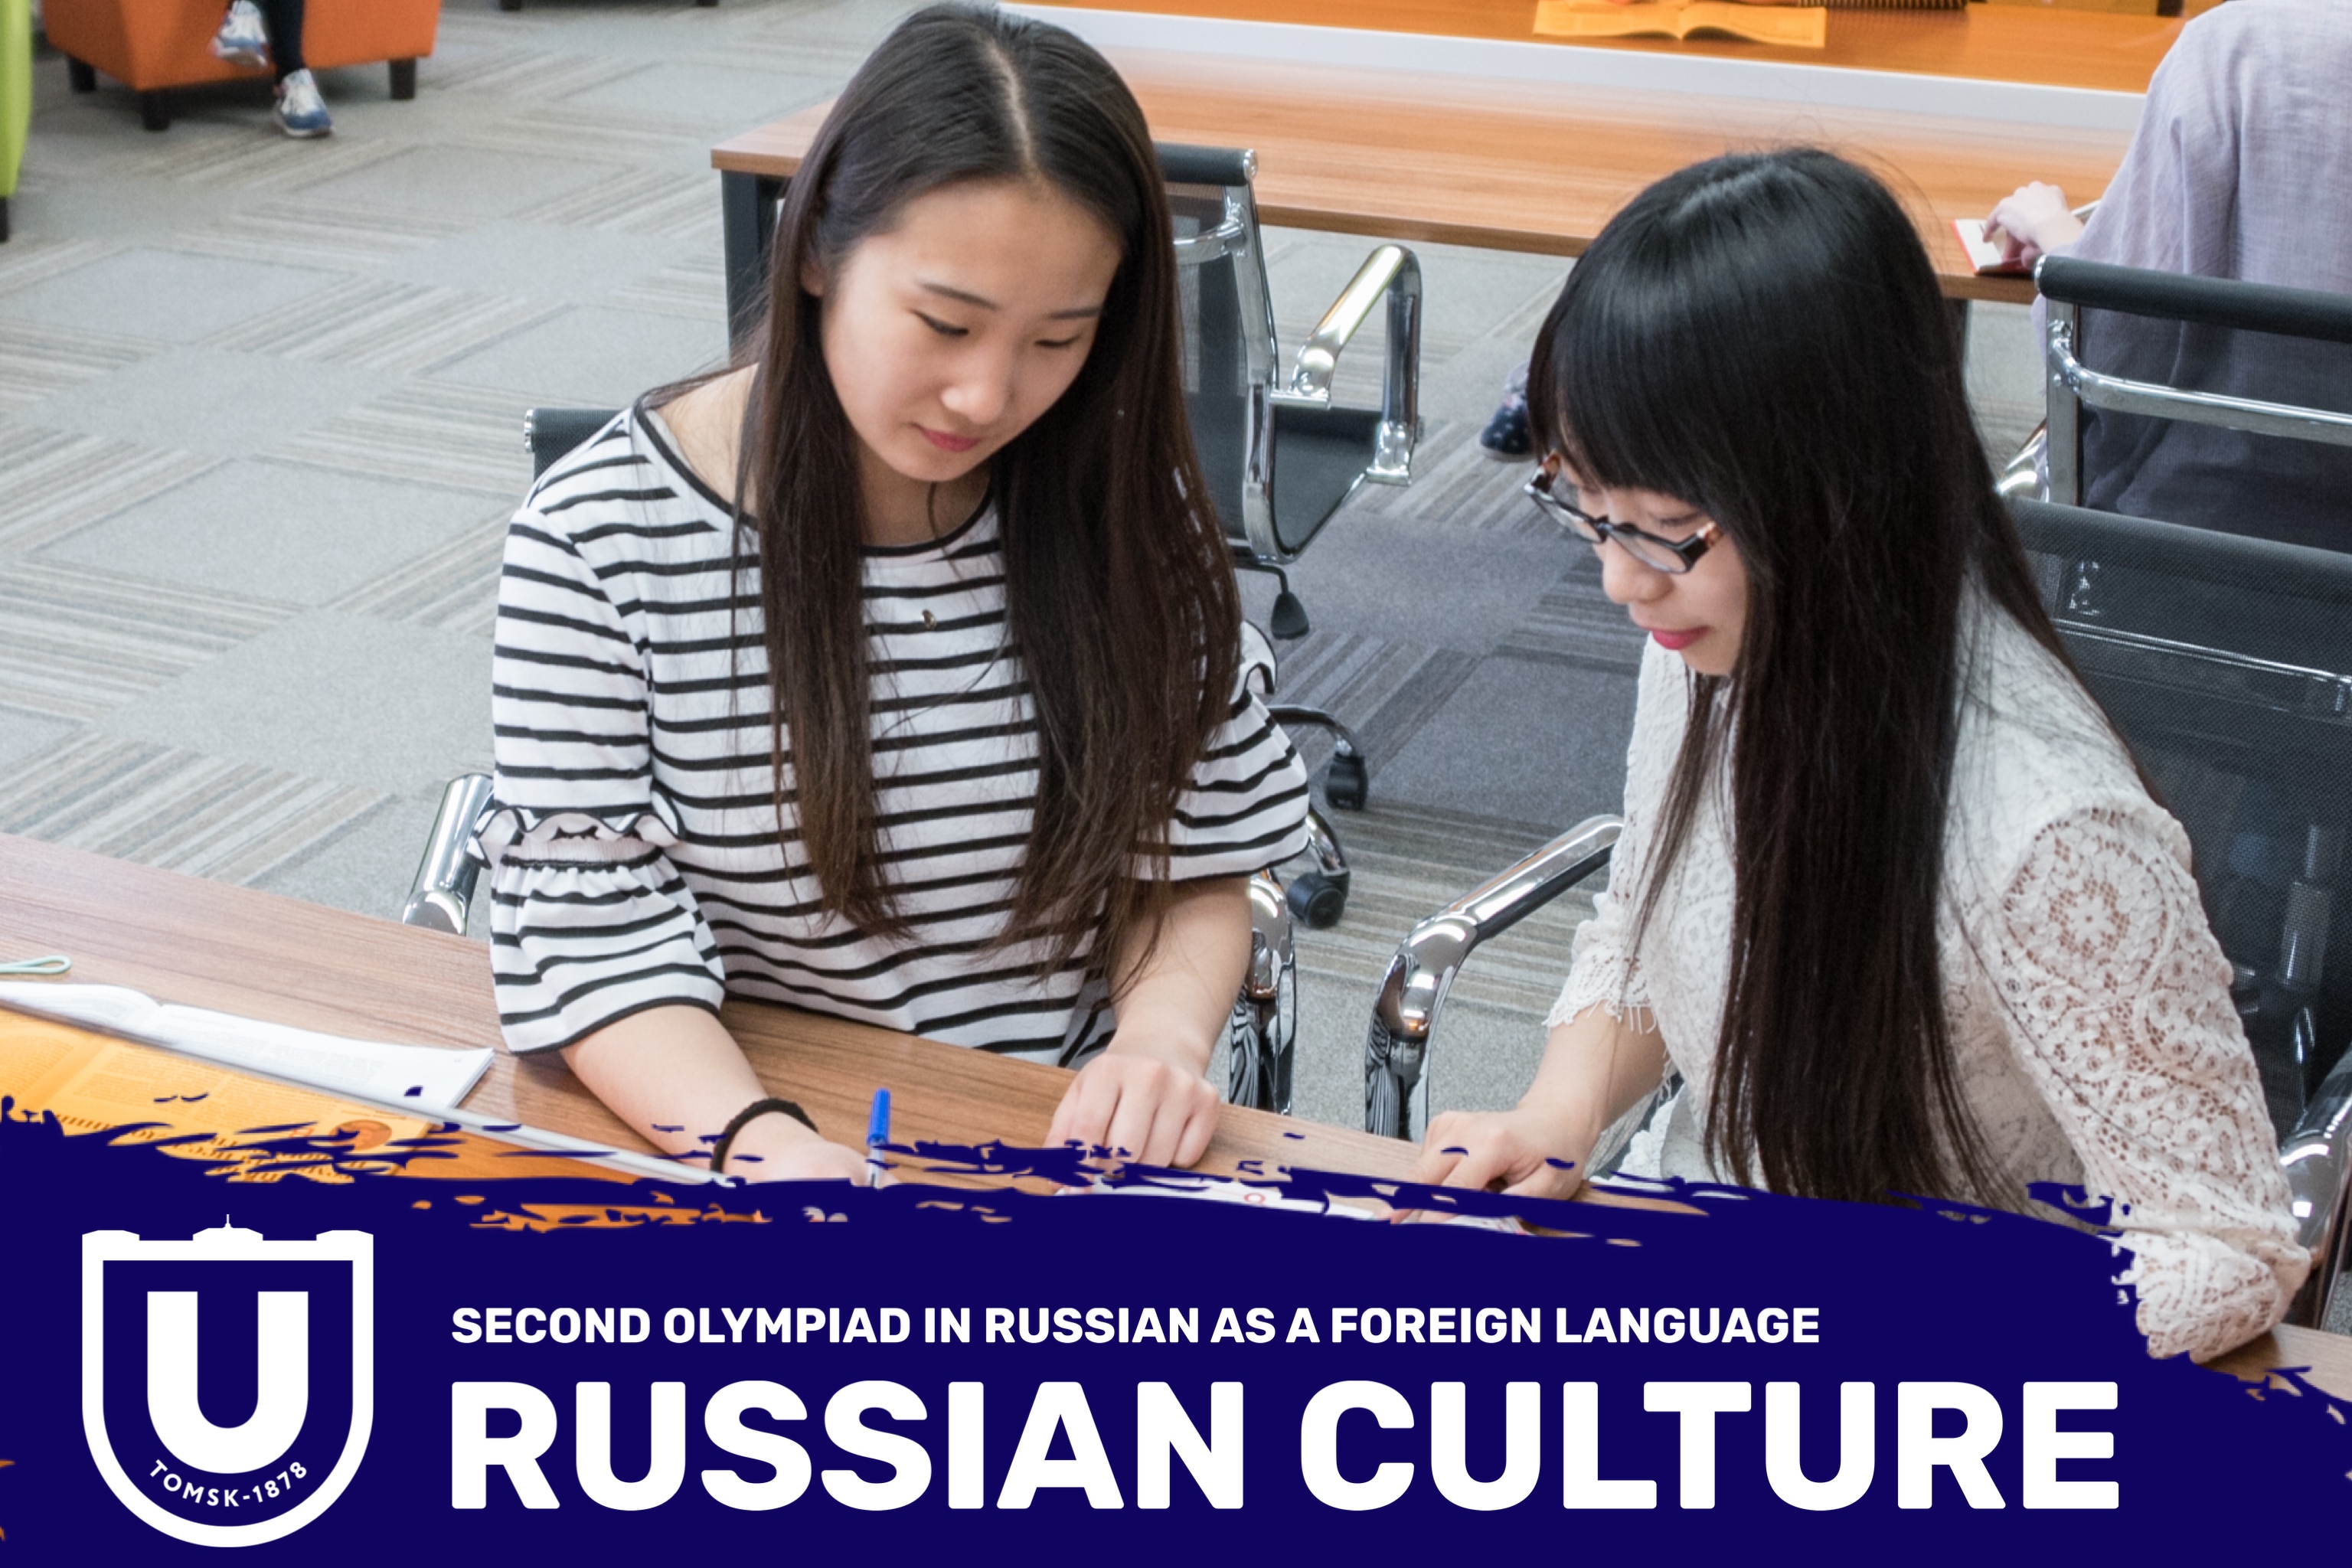 Participate in "Russian Culture - 2022", an Olympiad in Russian as a foreign language!